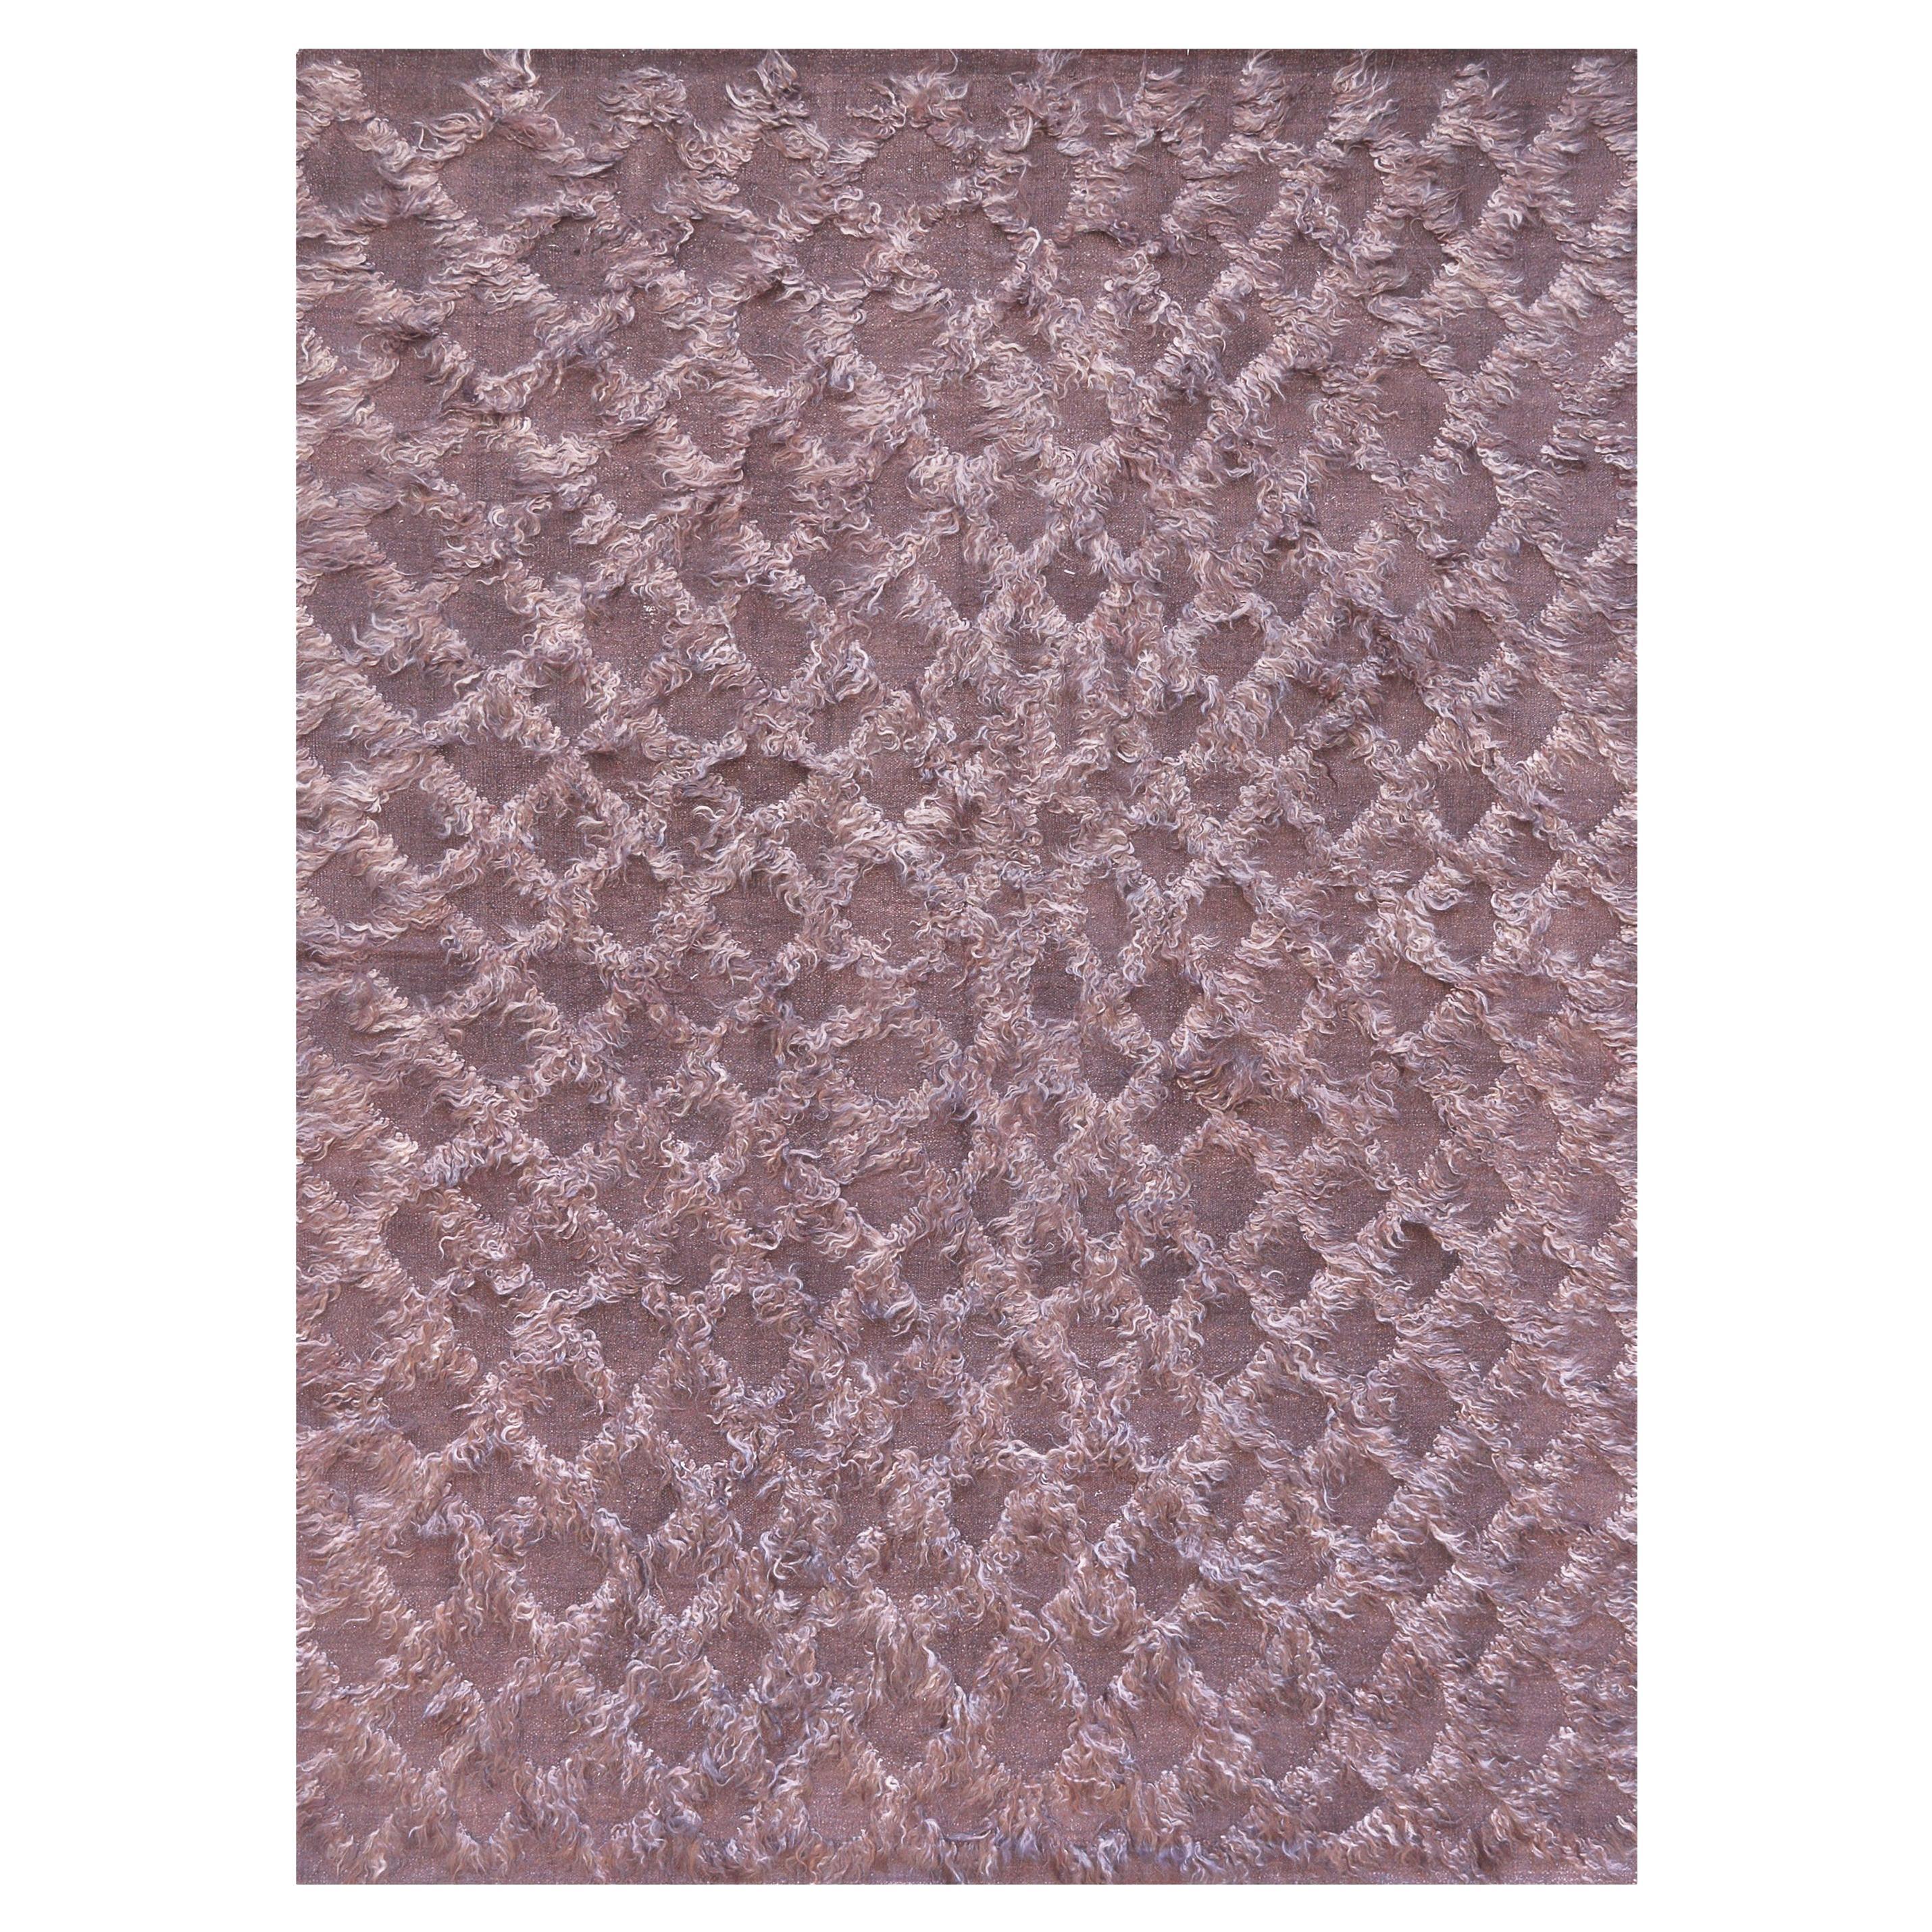 Handwoven Wool and Mohair Tufted Trellis Rug